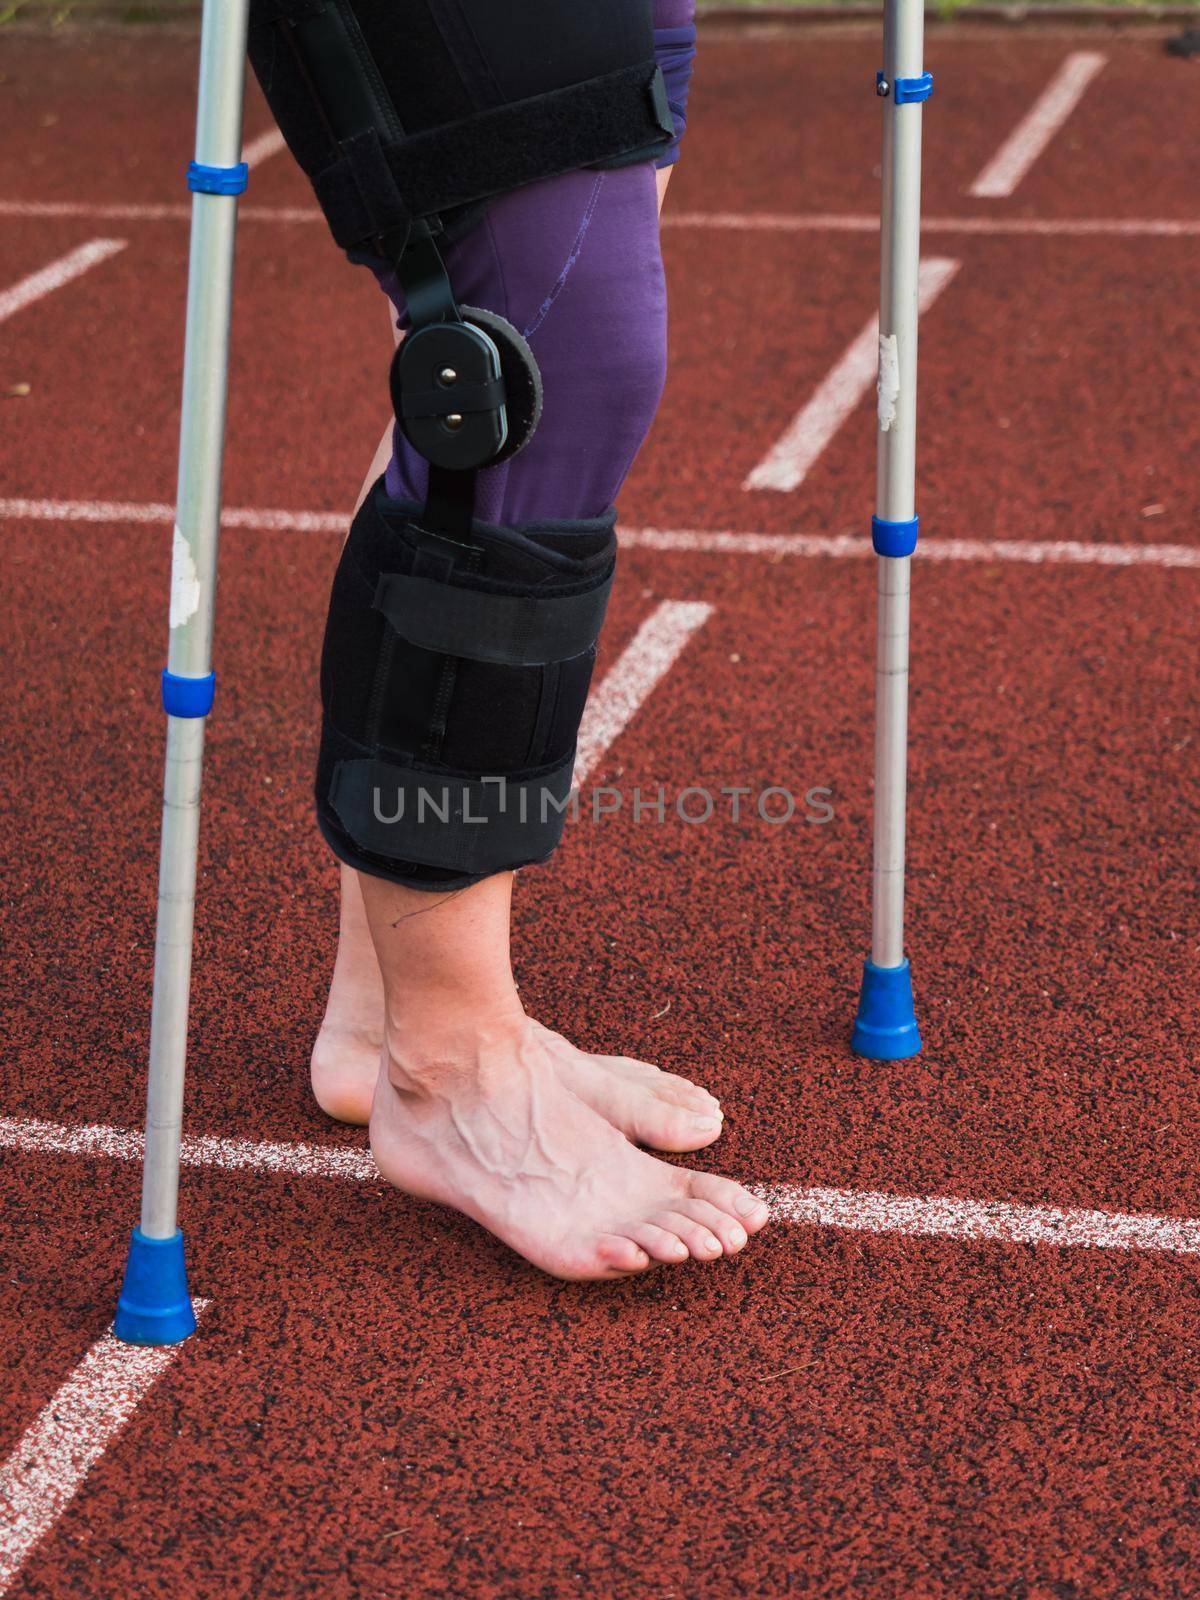 Hurt runner walk by crutches on track after competition by rdonar2